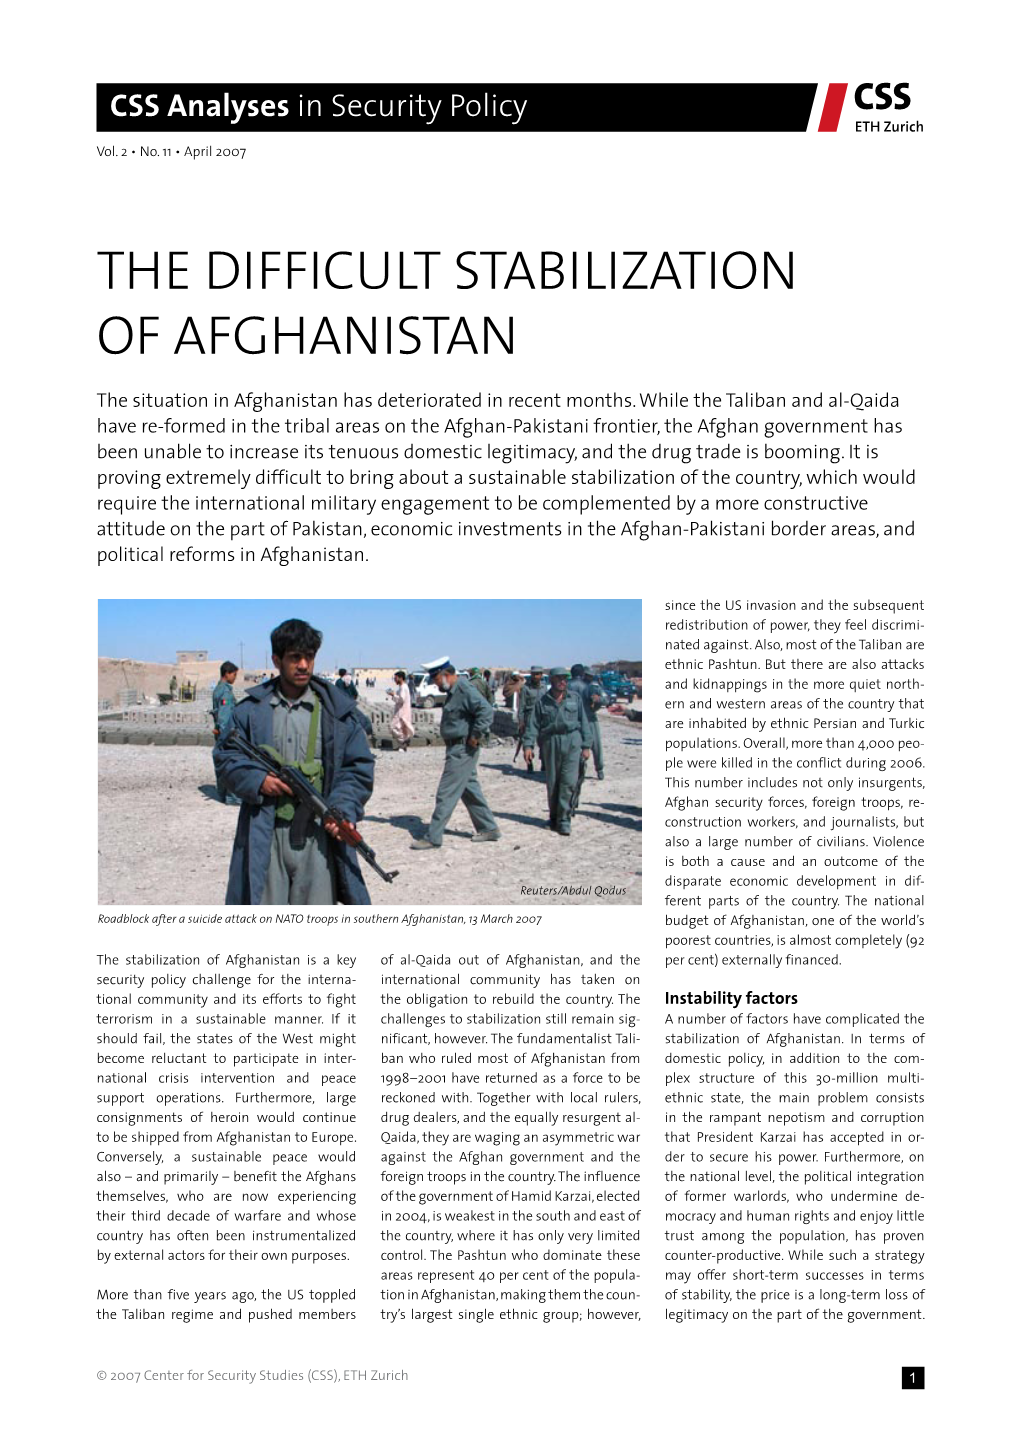 The Difficult Stabilization of Afghanistan the Situation in Afghanistan Has Deteriorated in Recent Months